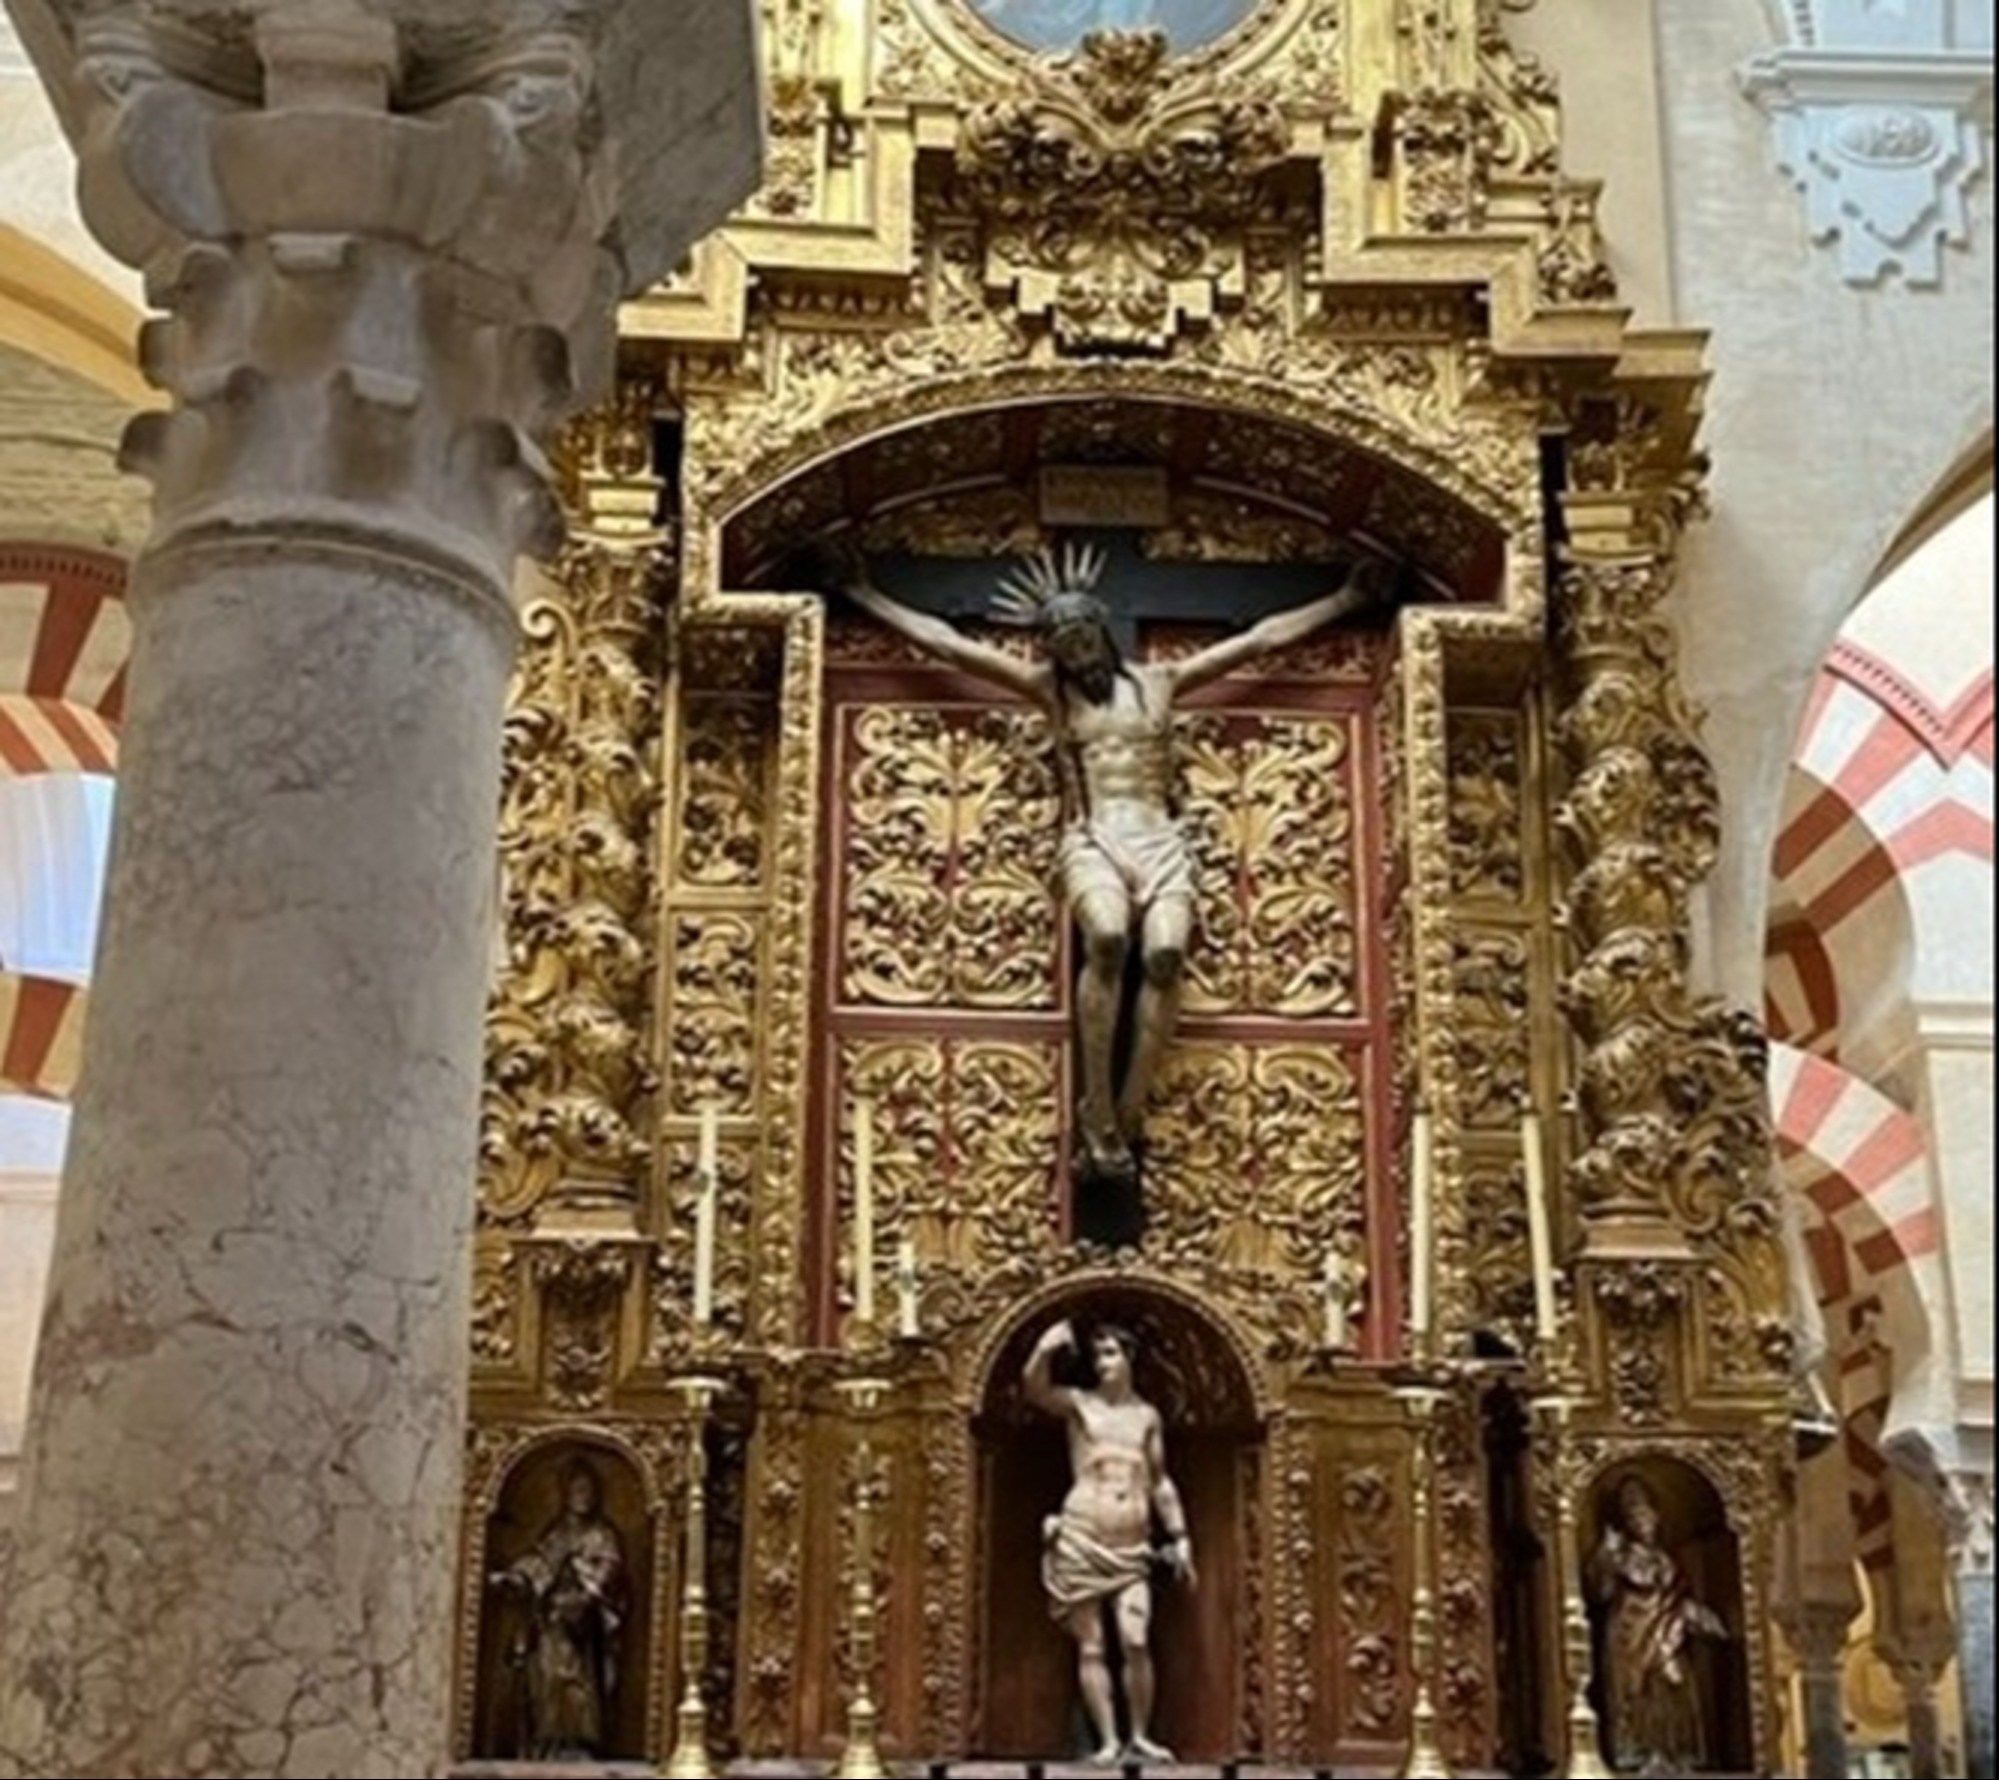 The Mosque in Cordoba was converted to a Catholic church and this altar was added per Sandy ©Sandy Green